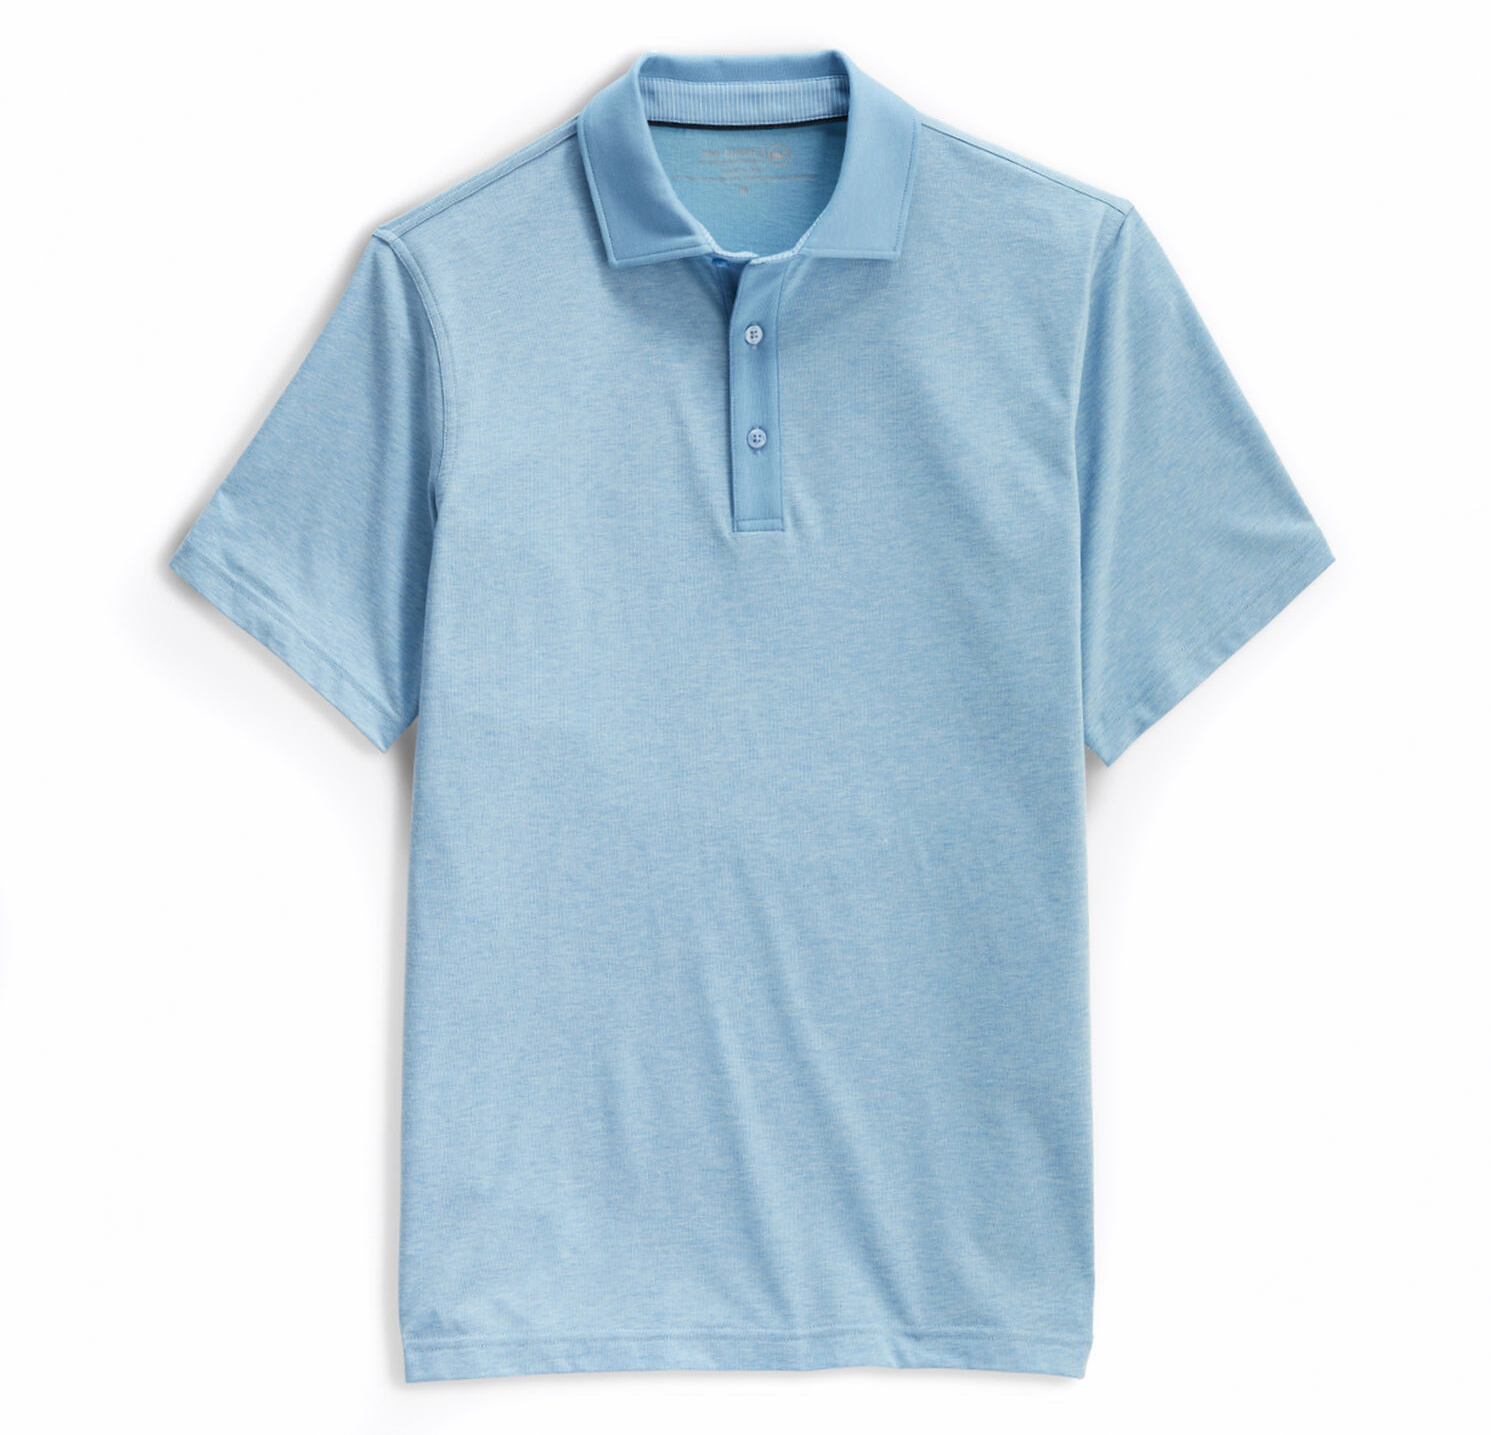 The Jim Nantz Collection Heathered Solid Polo